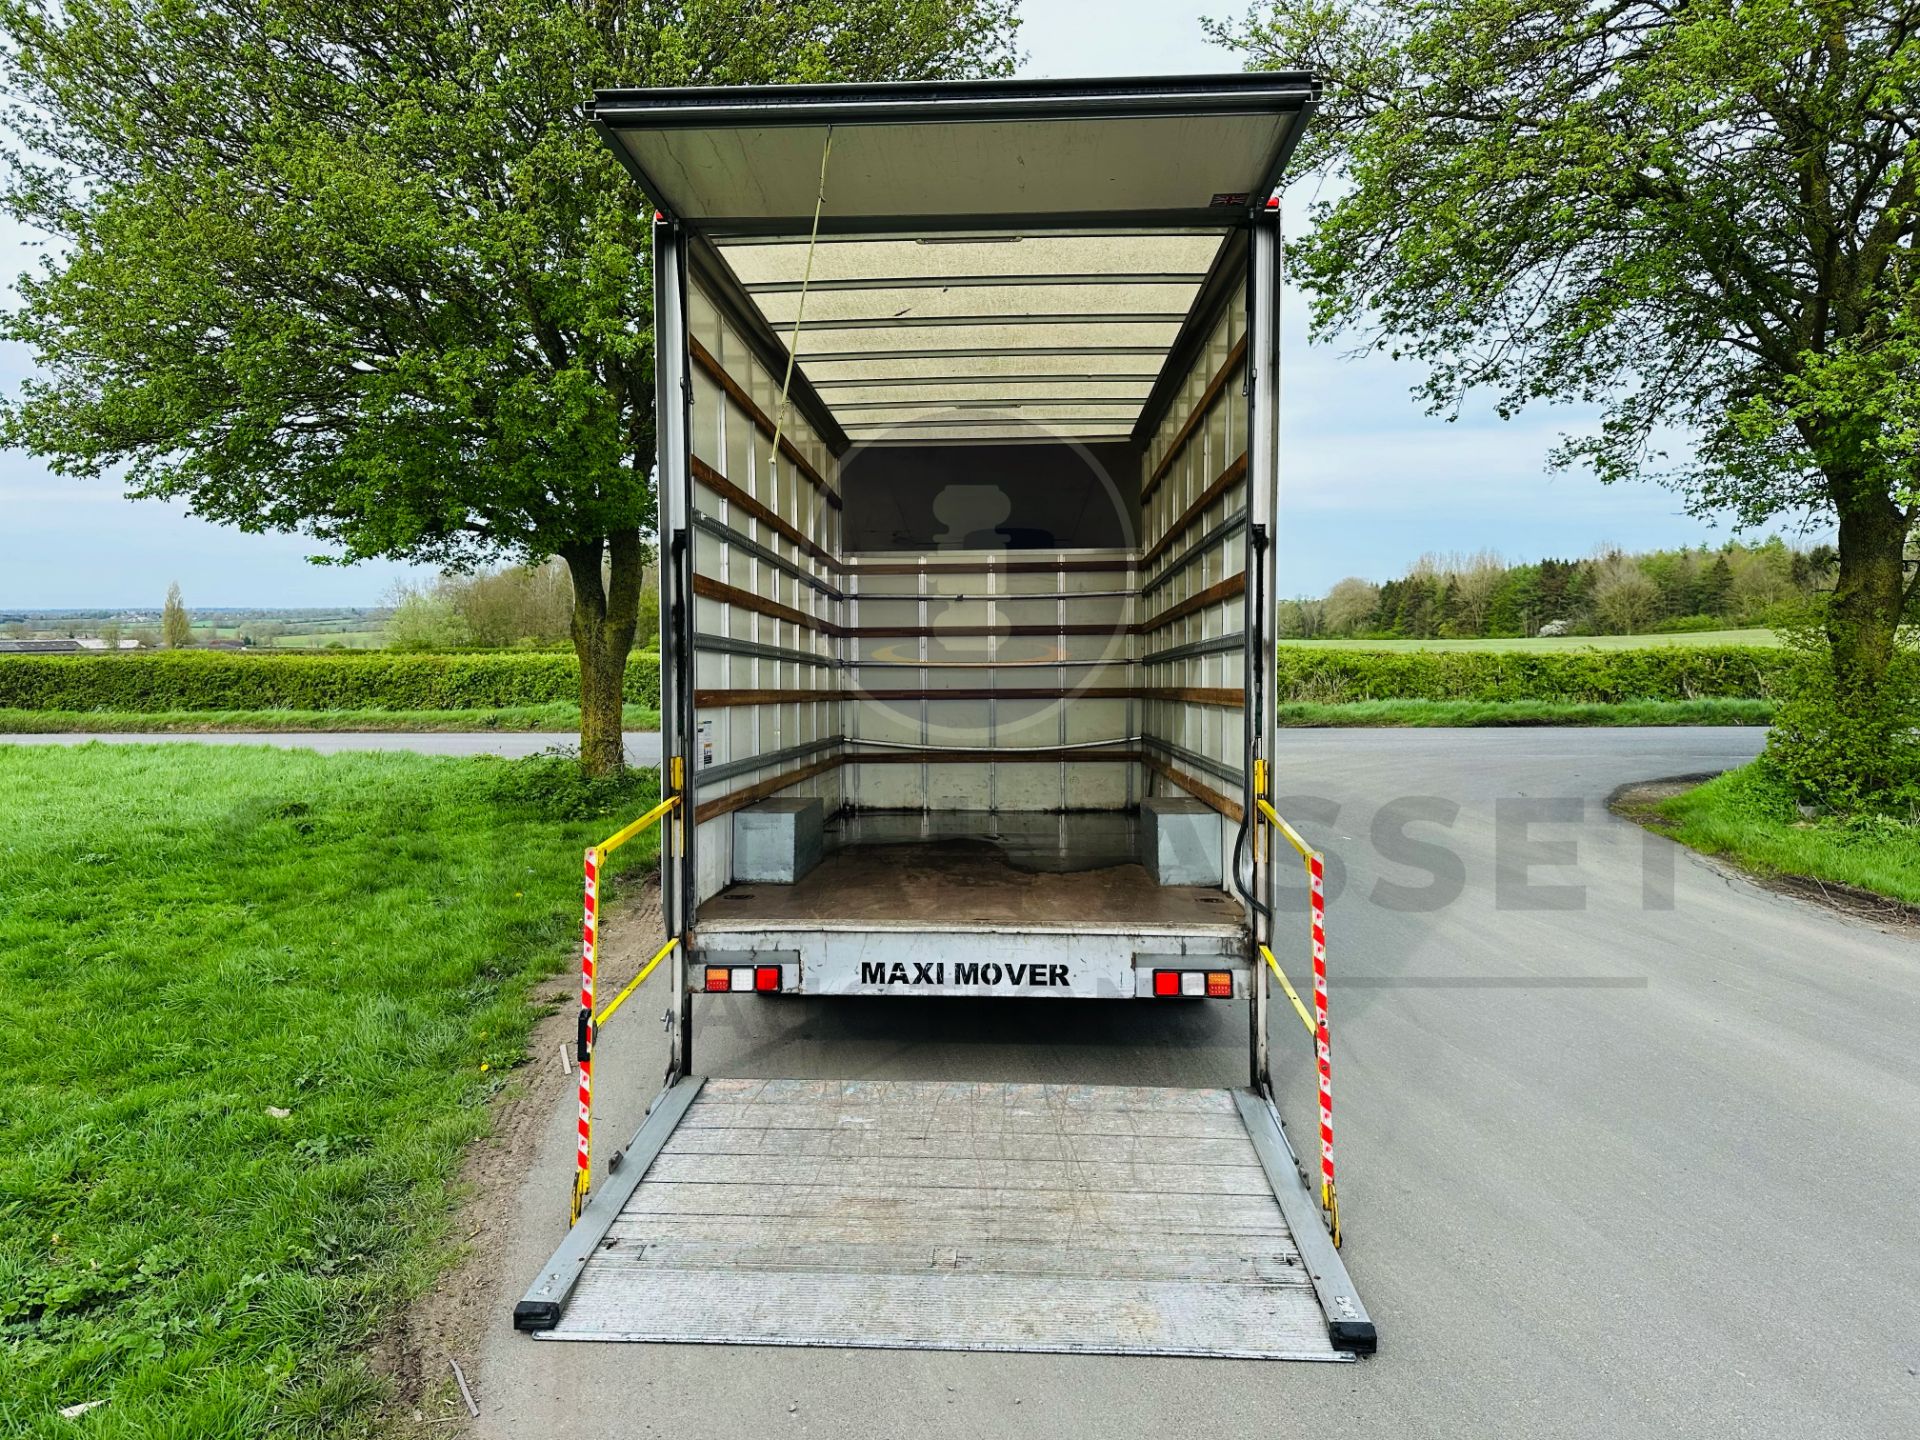 (ON SALE) PEUGEOT BOXER 335 *LWB LOW LOADER / MAXI MOVER LUTON* (2019 - EURO 6) 2.0 BLUE HDI *A/C* - Image 11 of 27